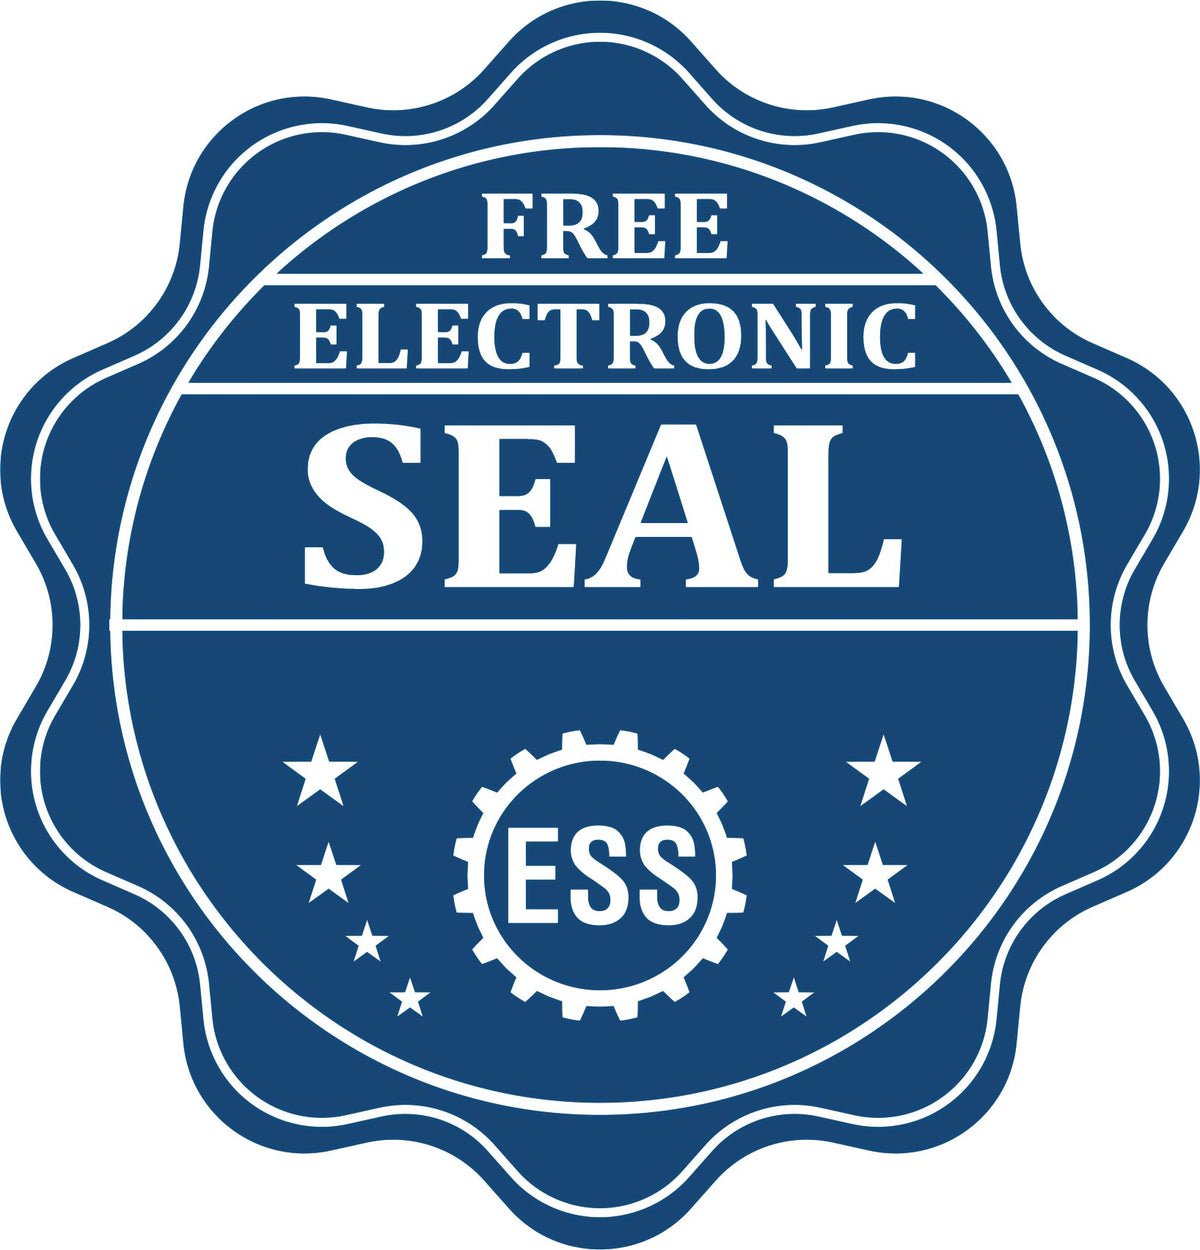 A badge showing a free electronic seal for the Soft Pocket Massachusetts Landscape Architect Embosser with stars and the ESS gear on the emblem.